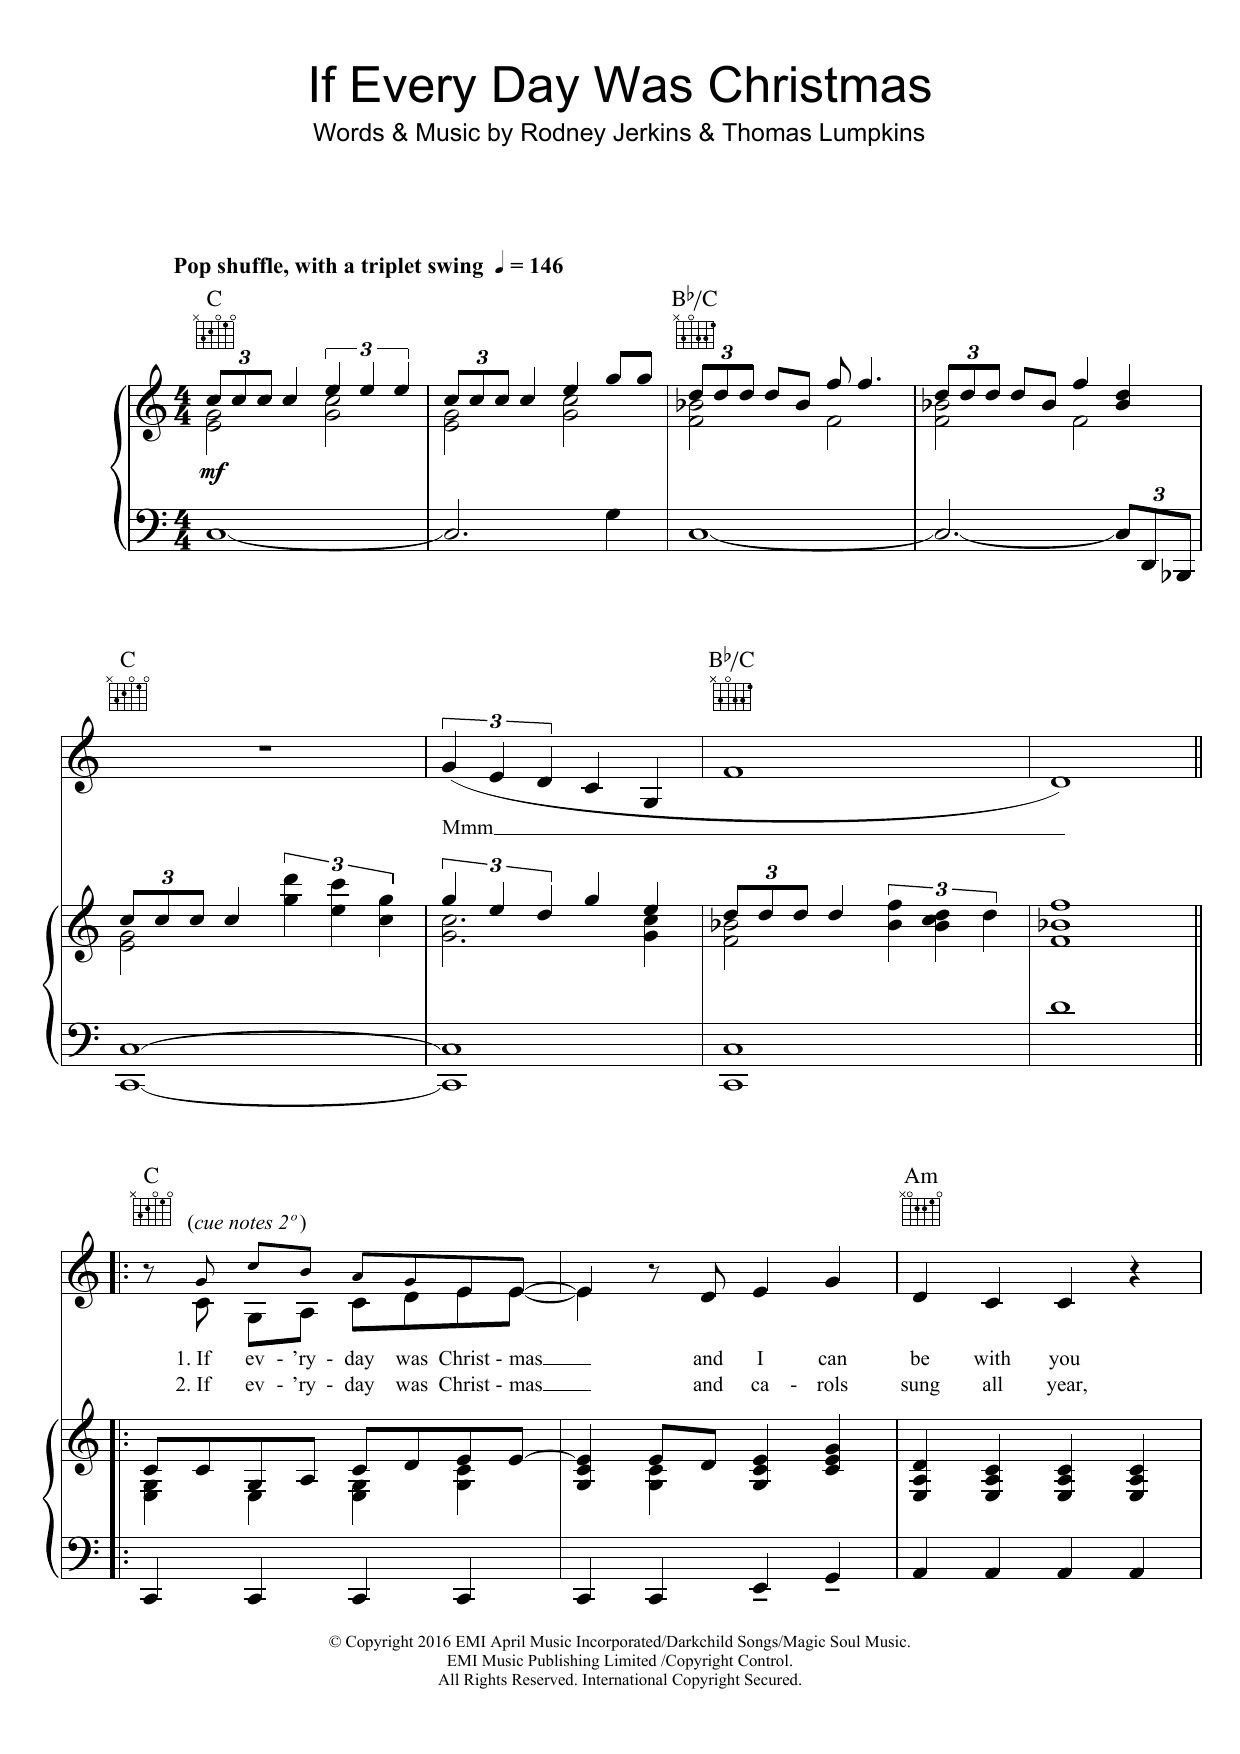 If Every Day Was Christmas sheet music